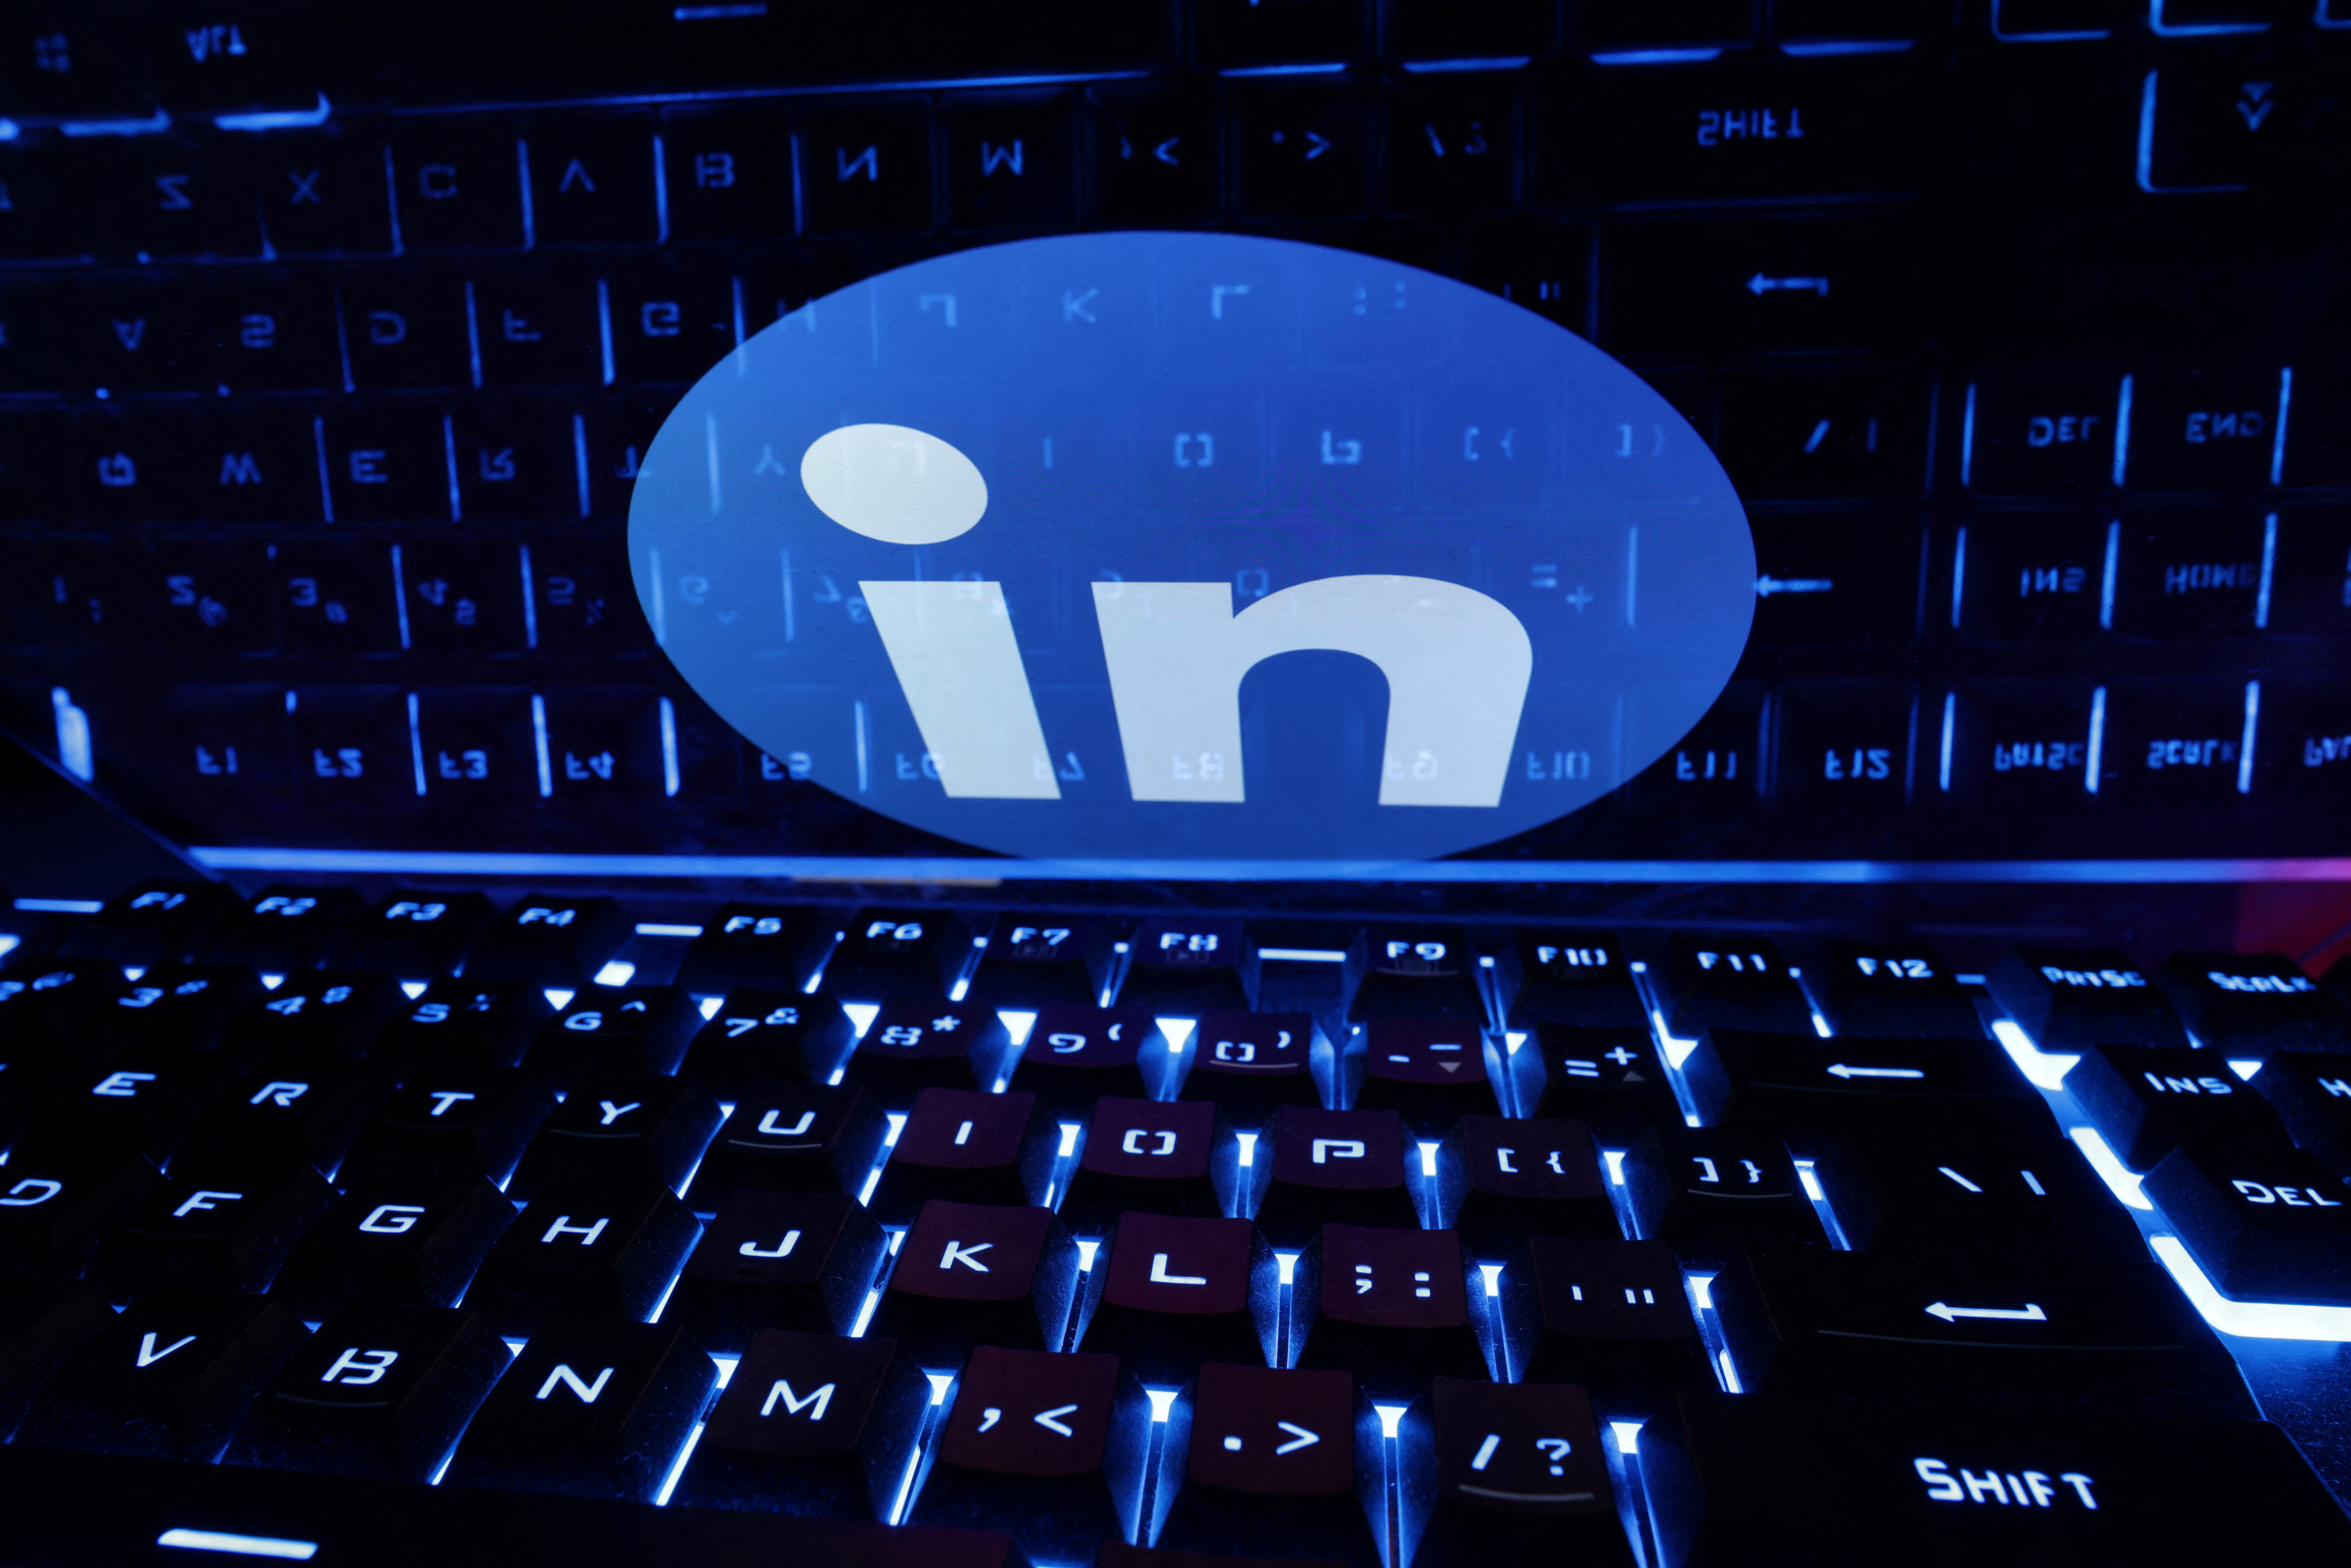 LinkedIn lays off 600+ workers in second round of cuts this year